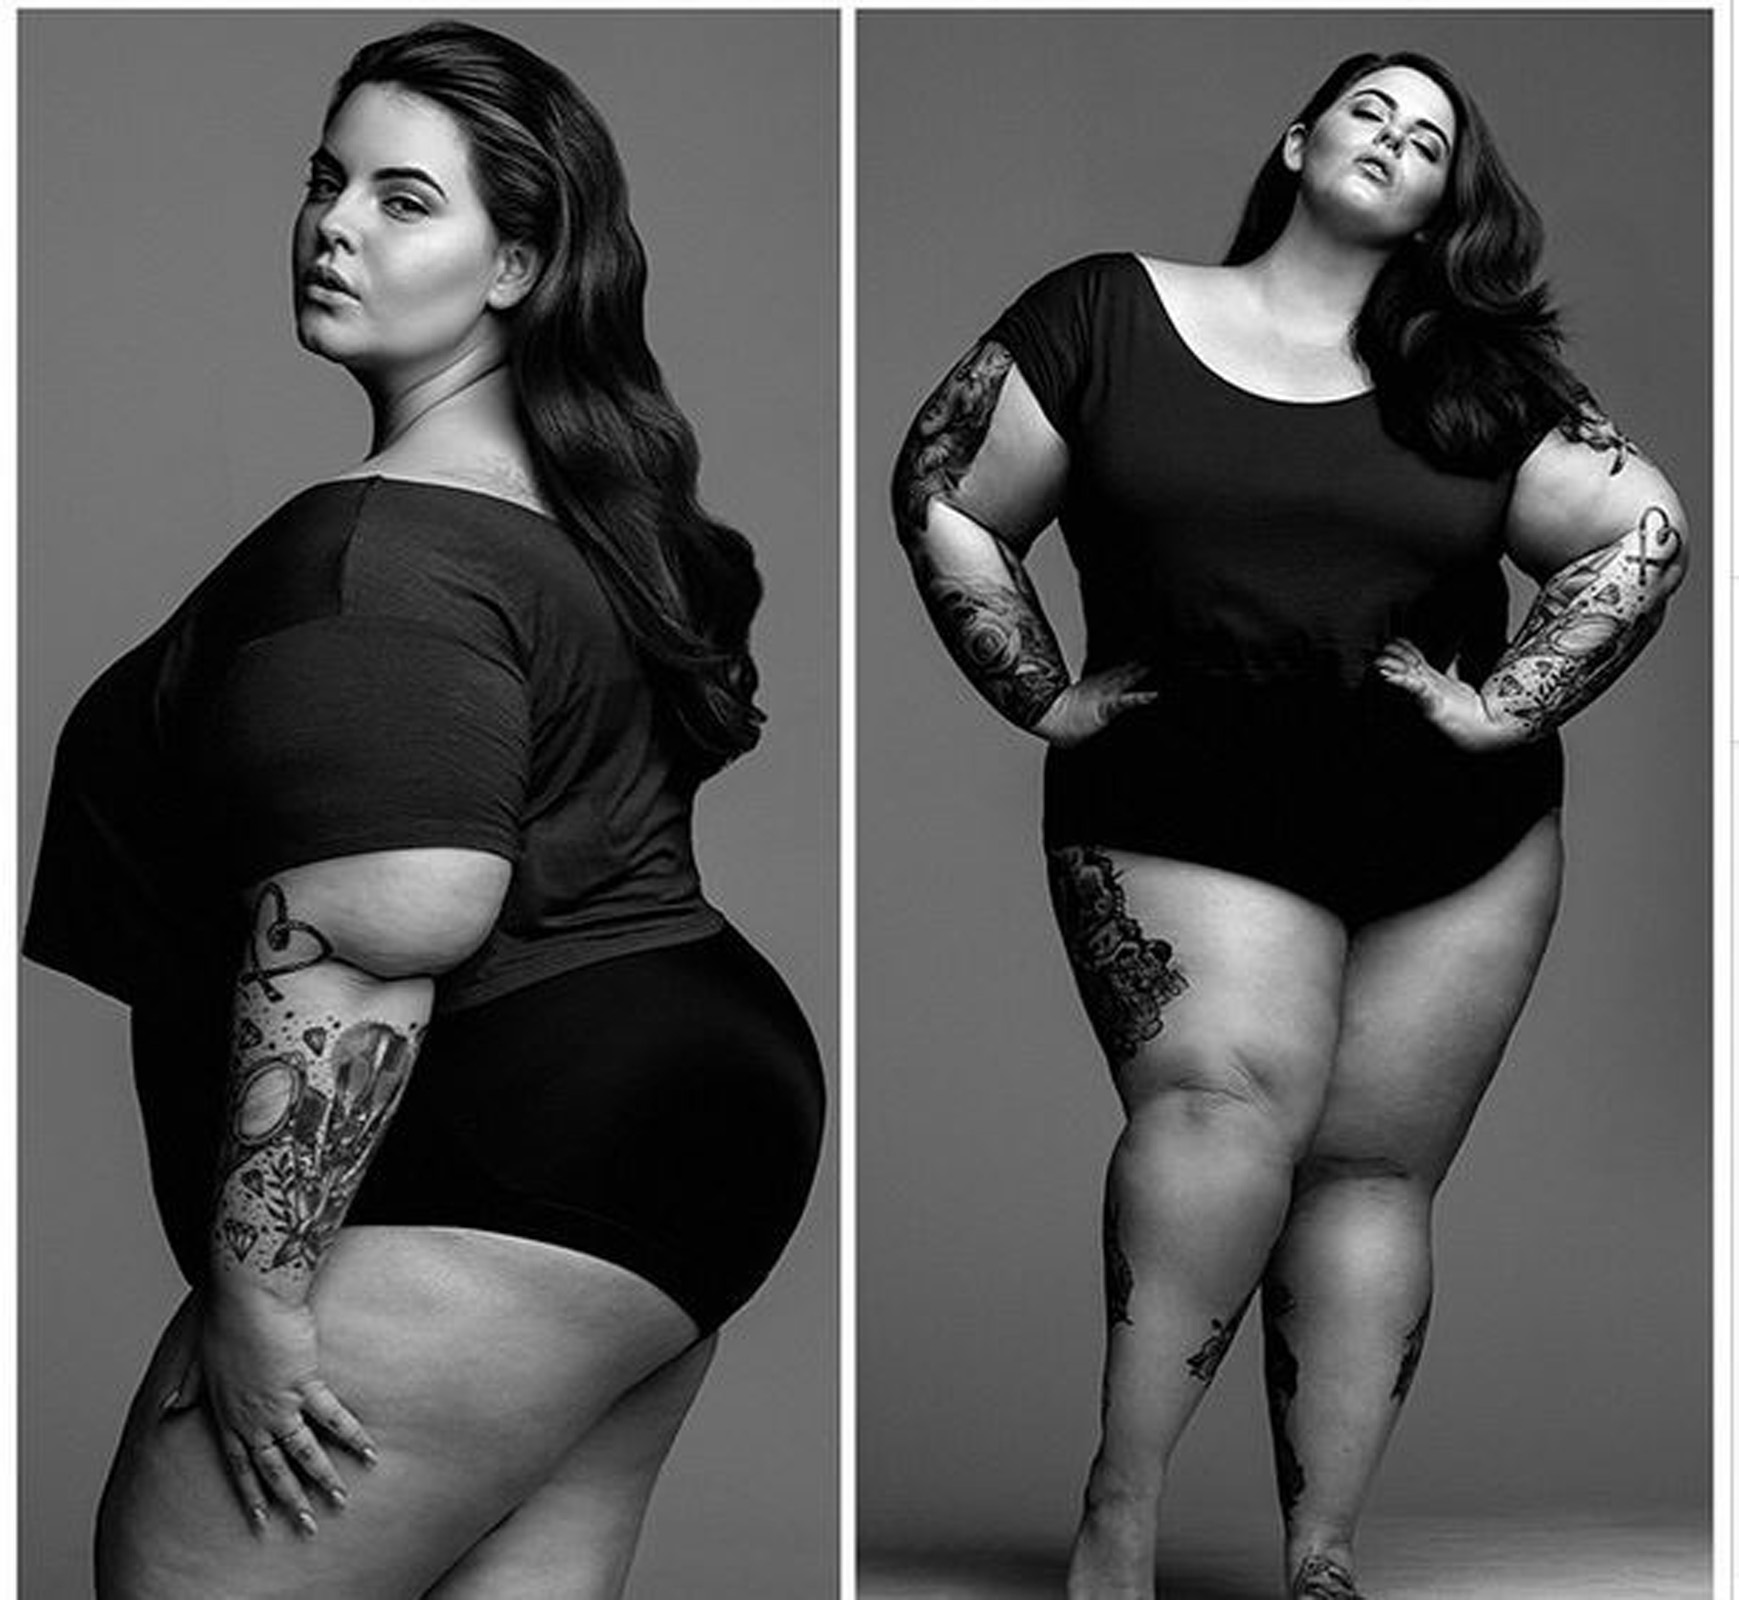 Plus sized model apologises for racist remark